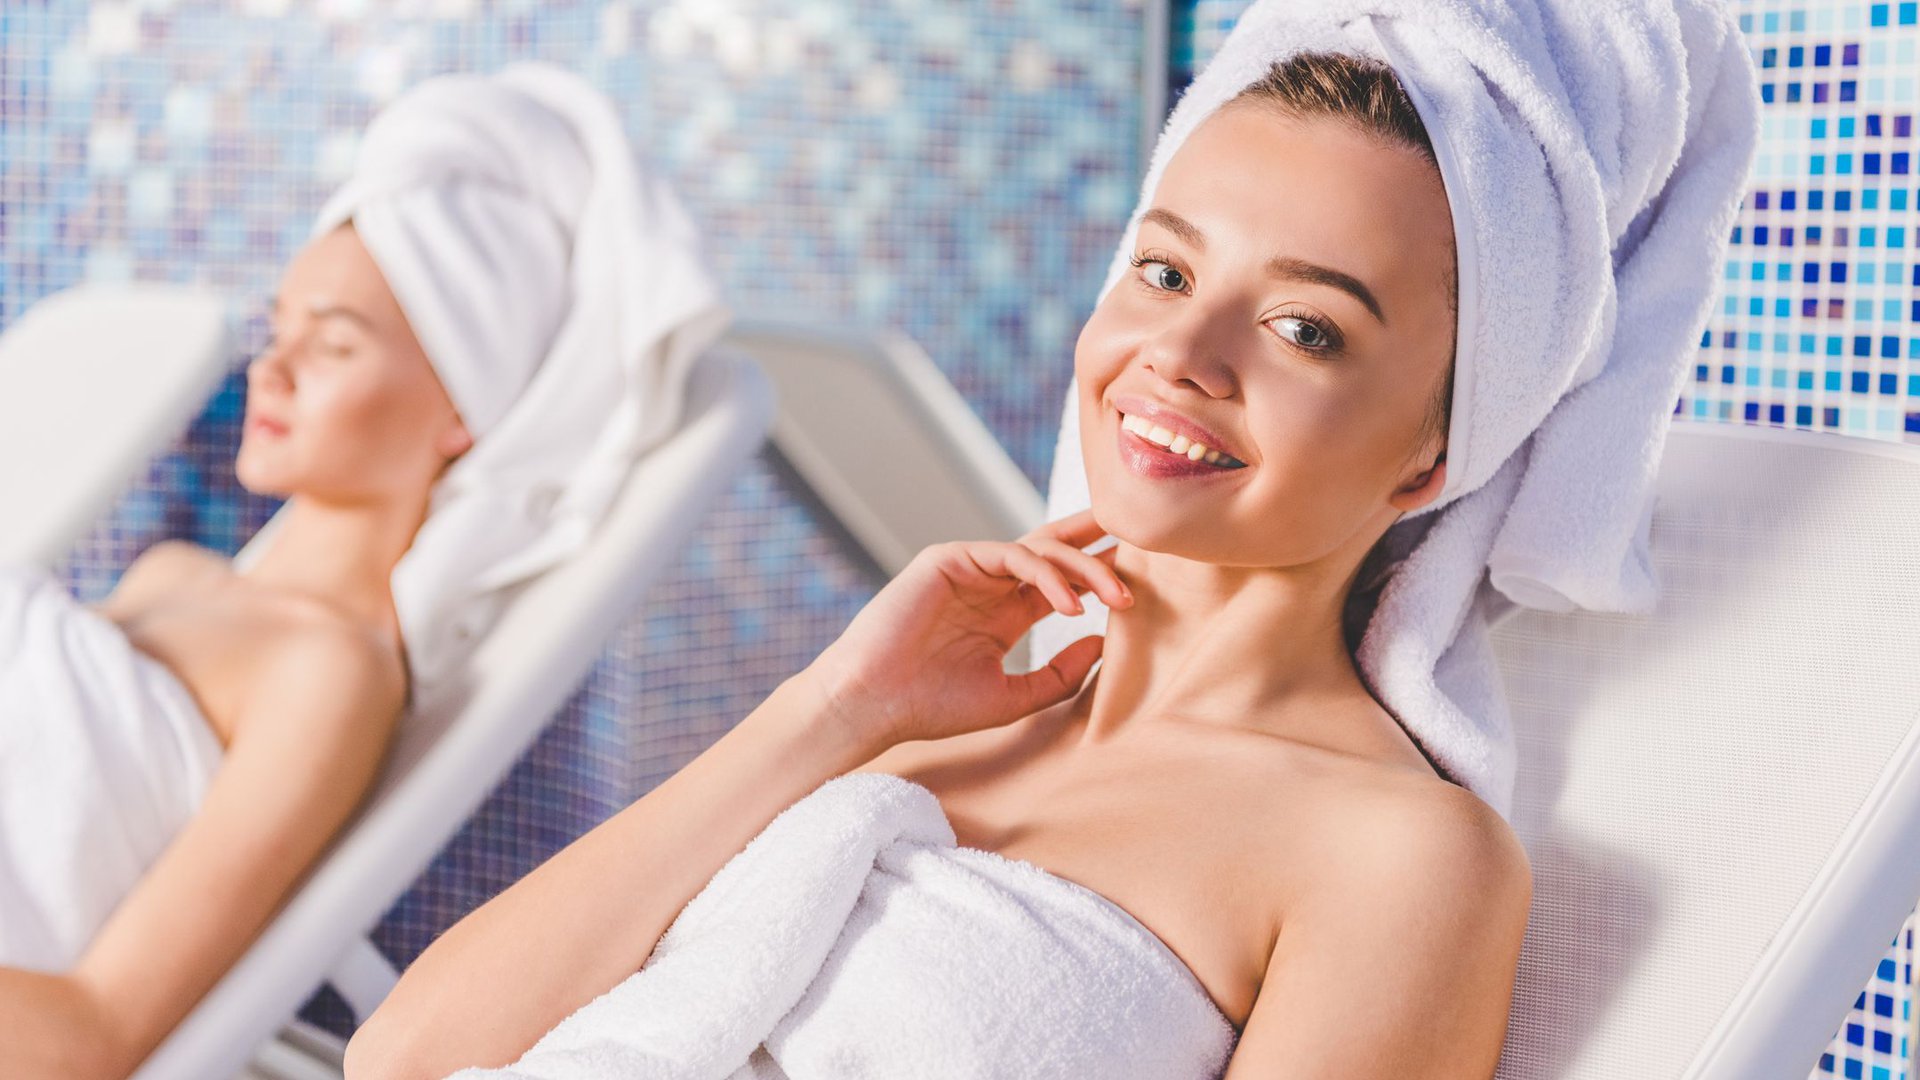 Renaissance yourself: TOP SPA centers in Tbilisi for true relaxation